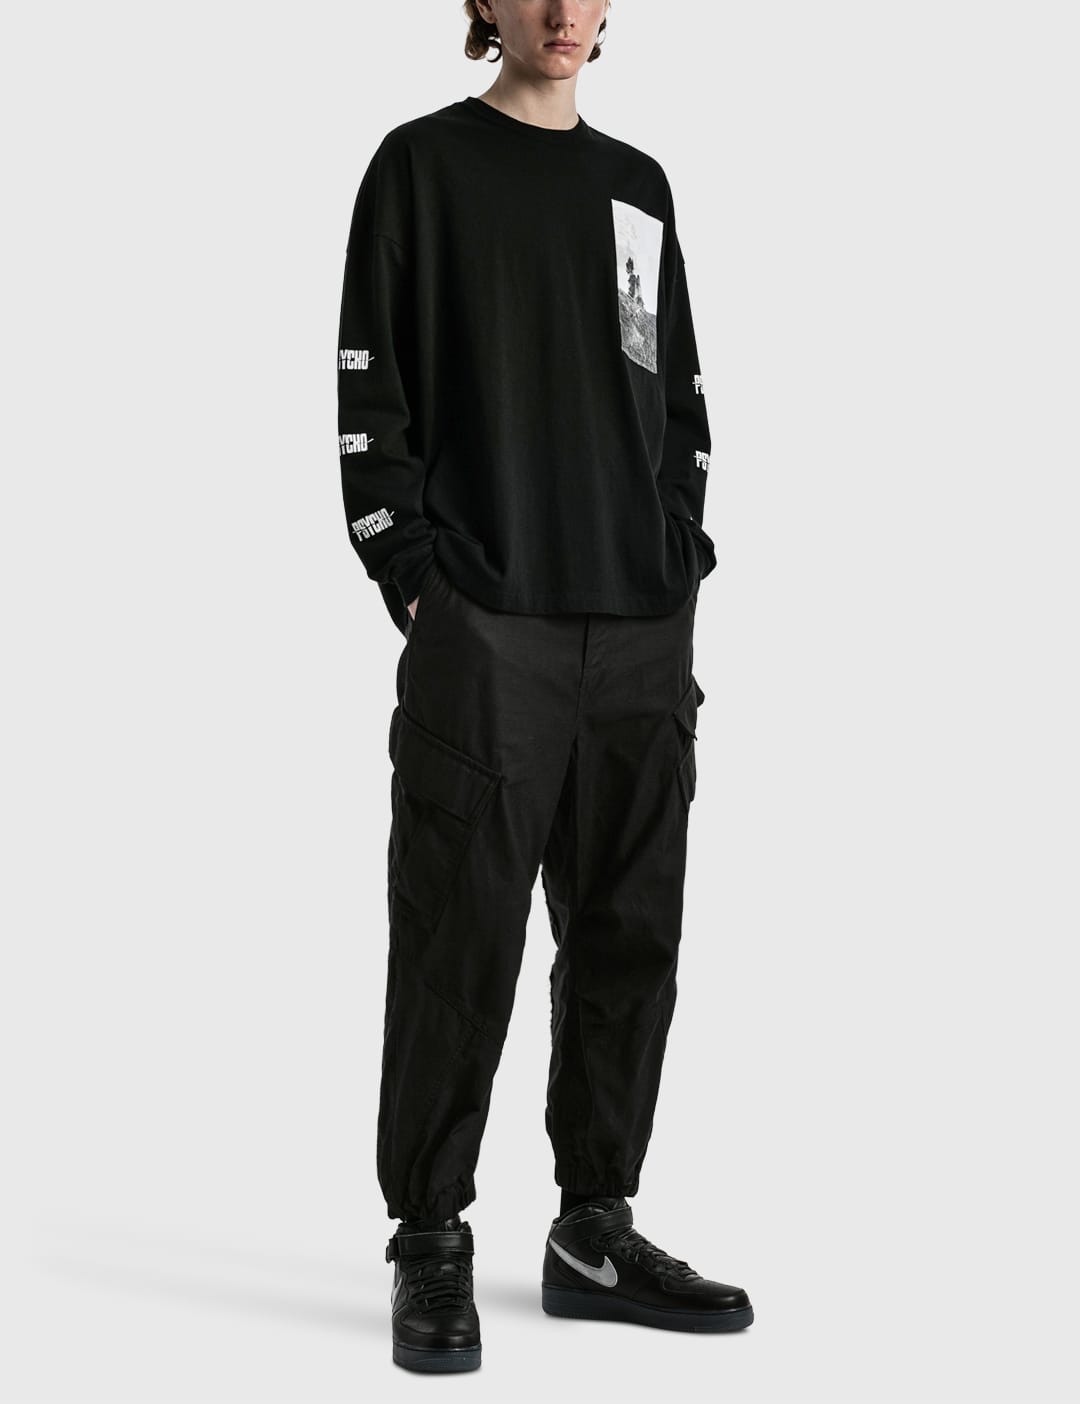 Undercover - BLACK CARGO PANTS | HBX - Globally Curated Fashion